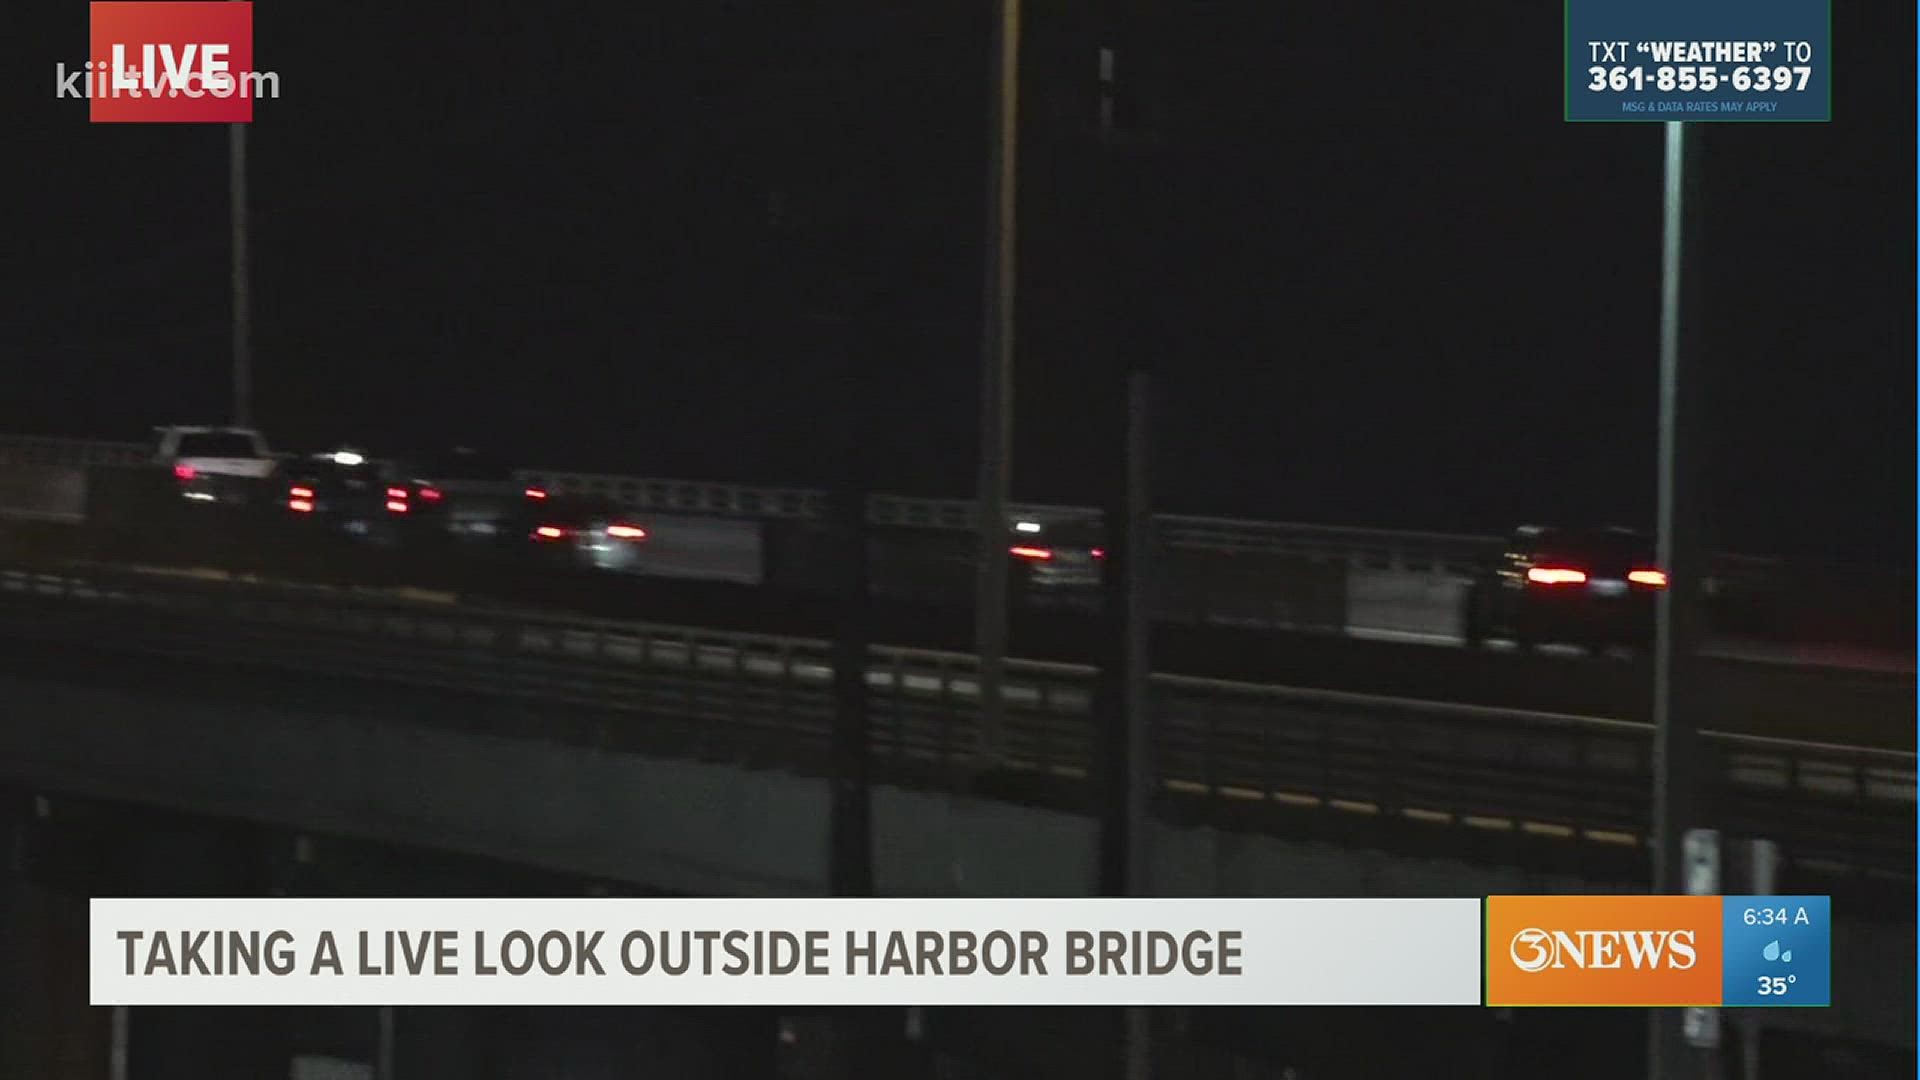 The Harbor Bridge is open and traffic is flowing smoothly.